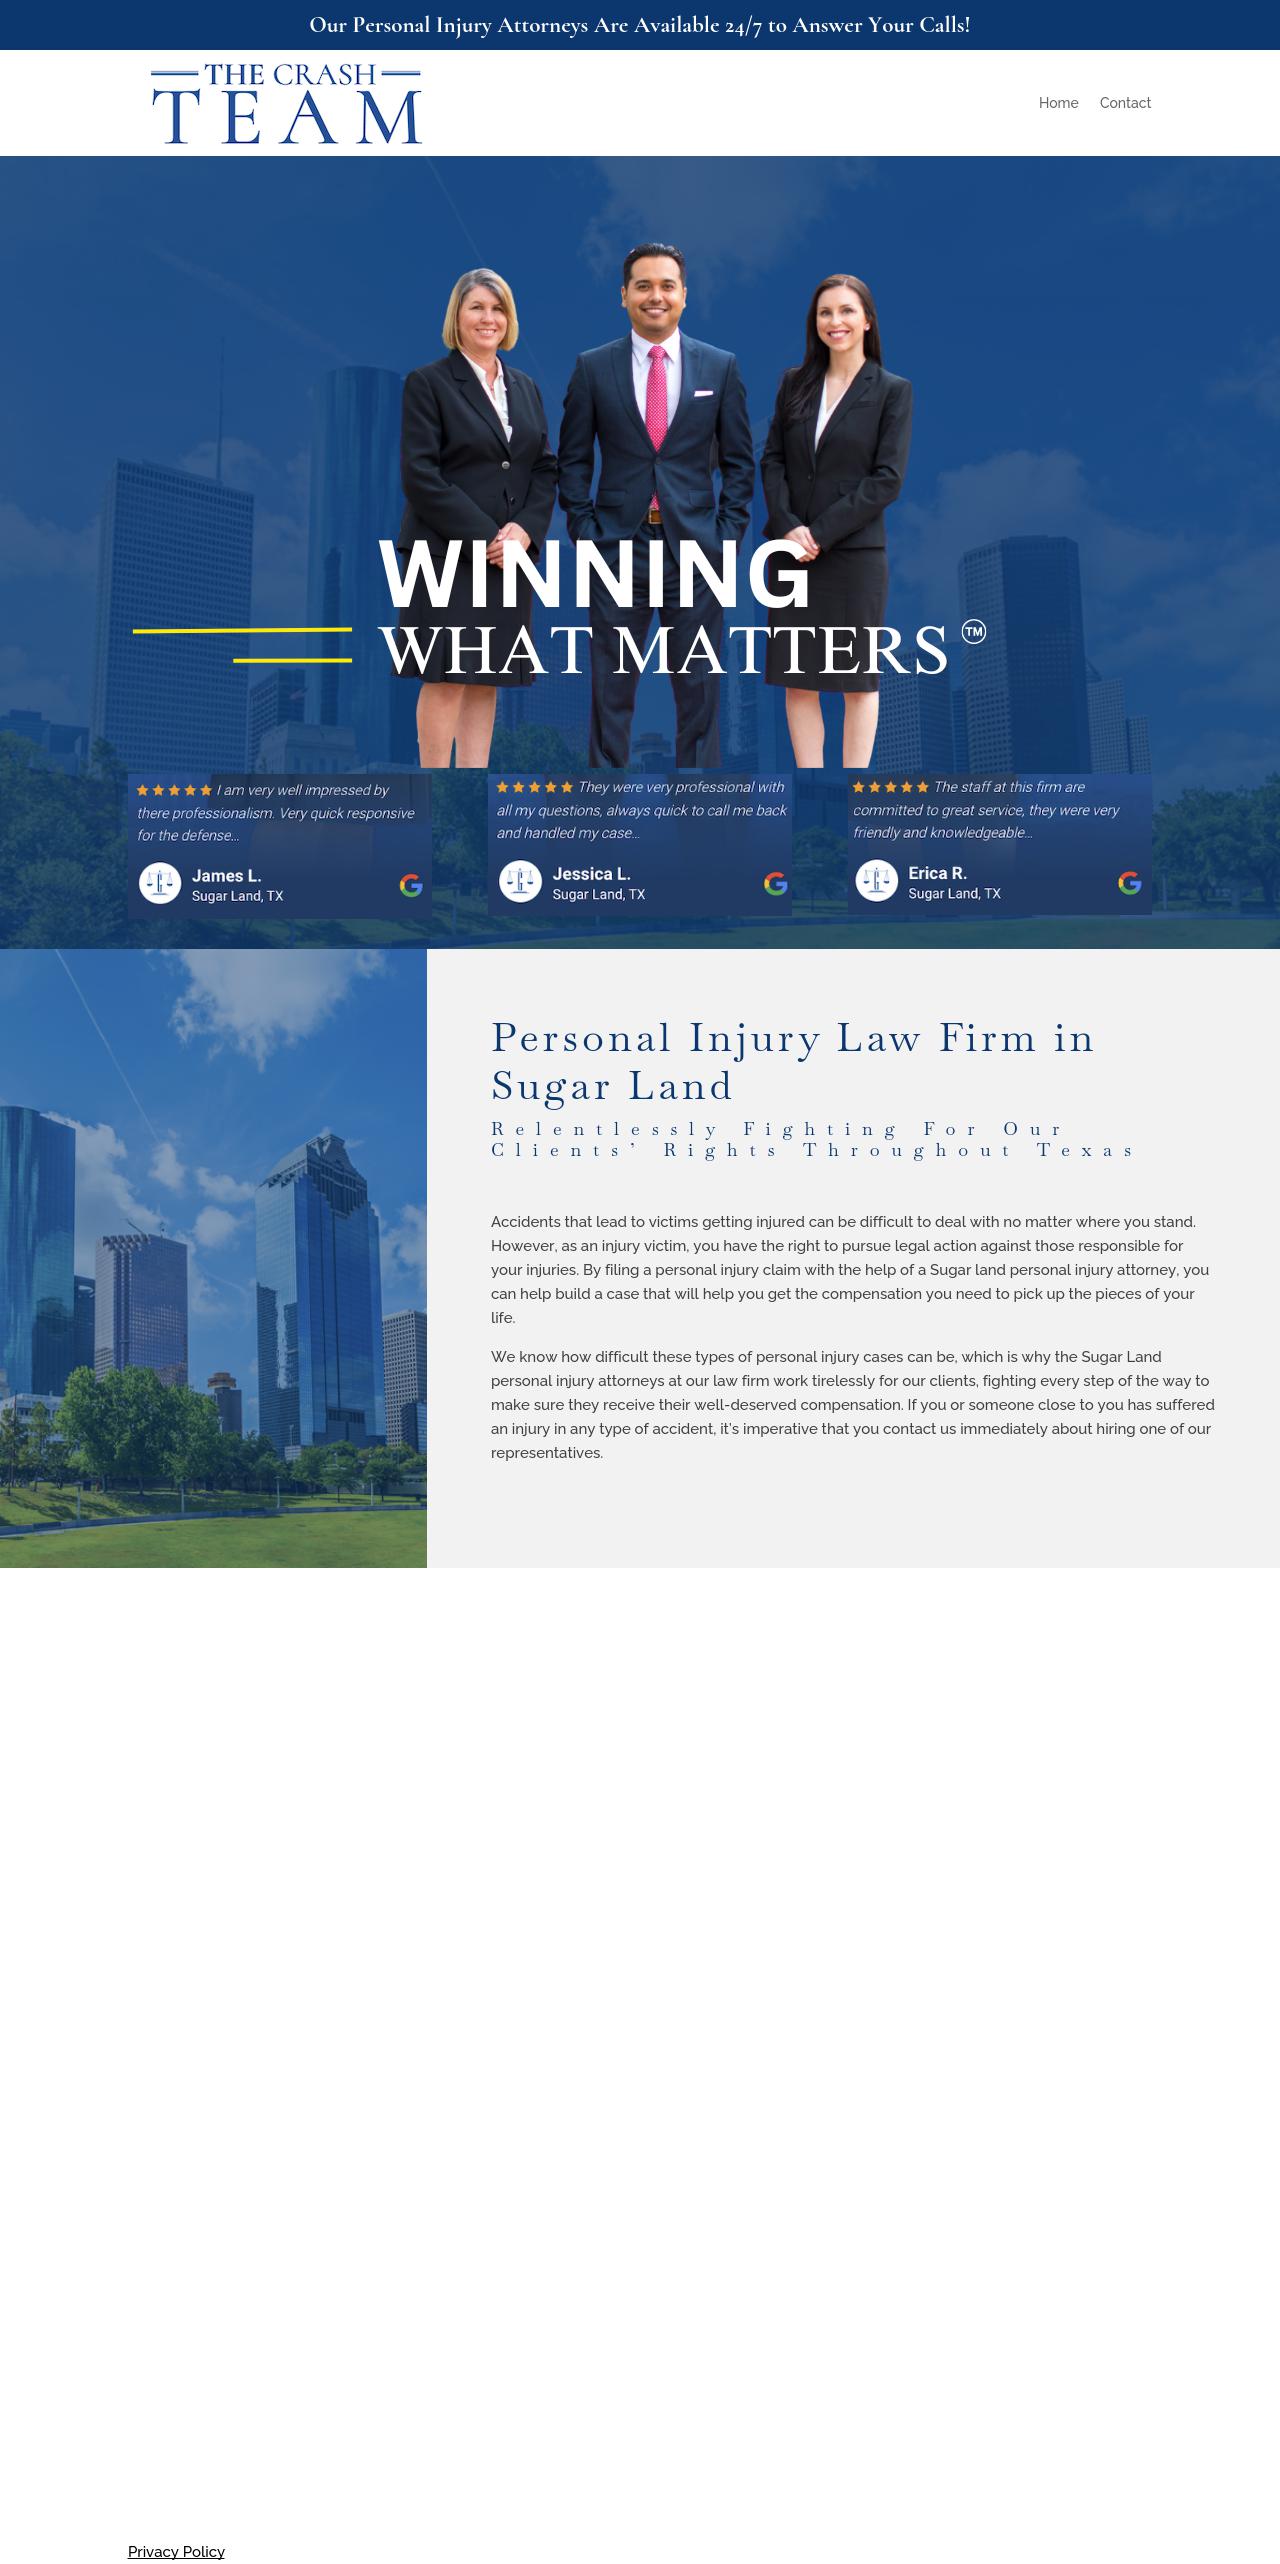 The Galvan Law Firm, PLLC - Houston TX Lawyers